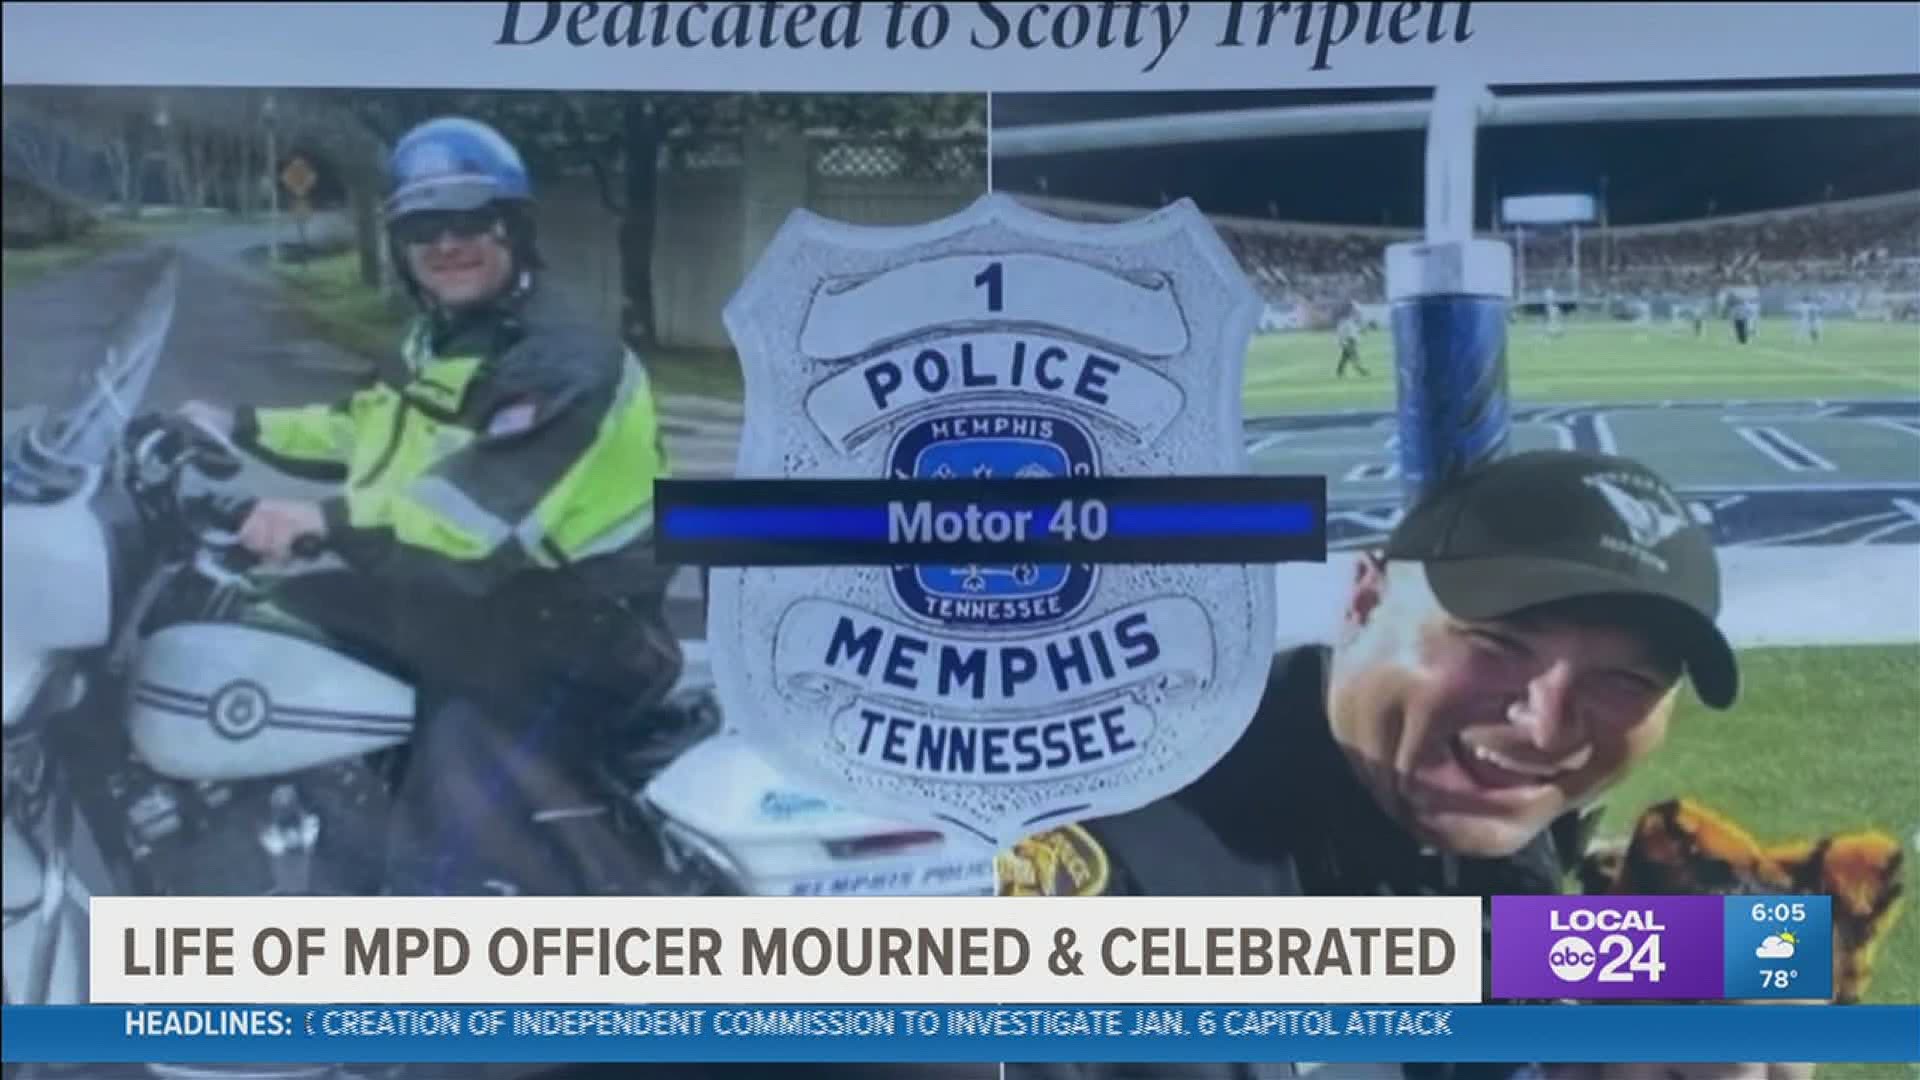 27-year veteran of MPD died after motorcycle accident on duty last weekend; survived by his wife and two children.